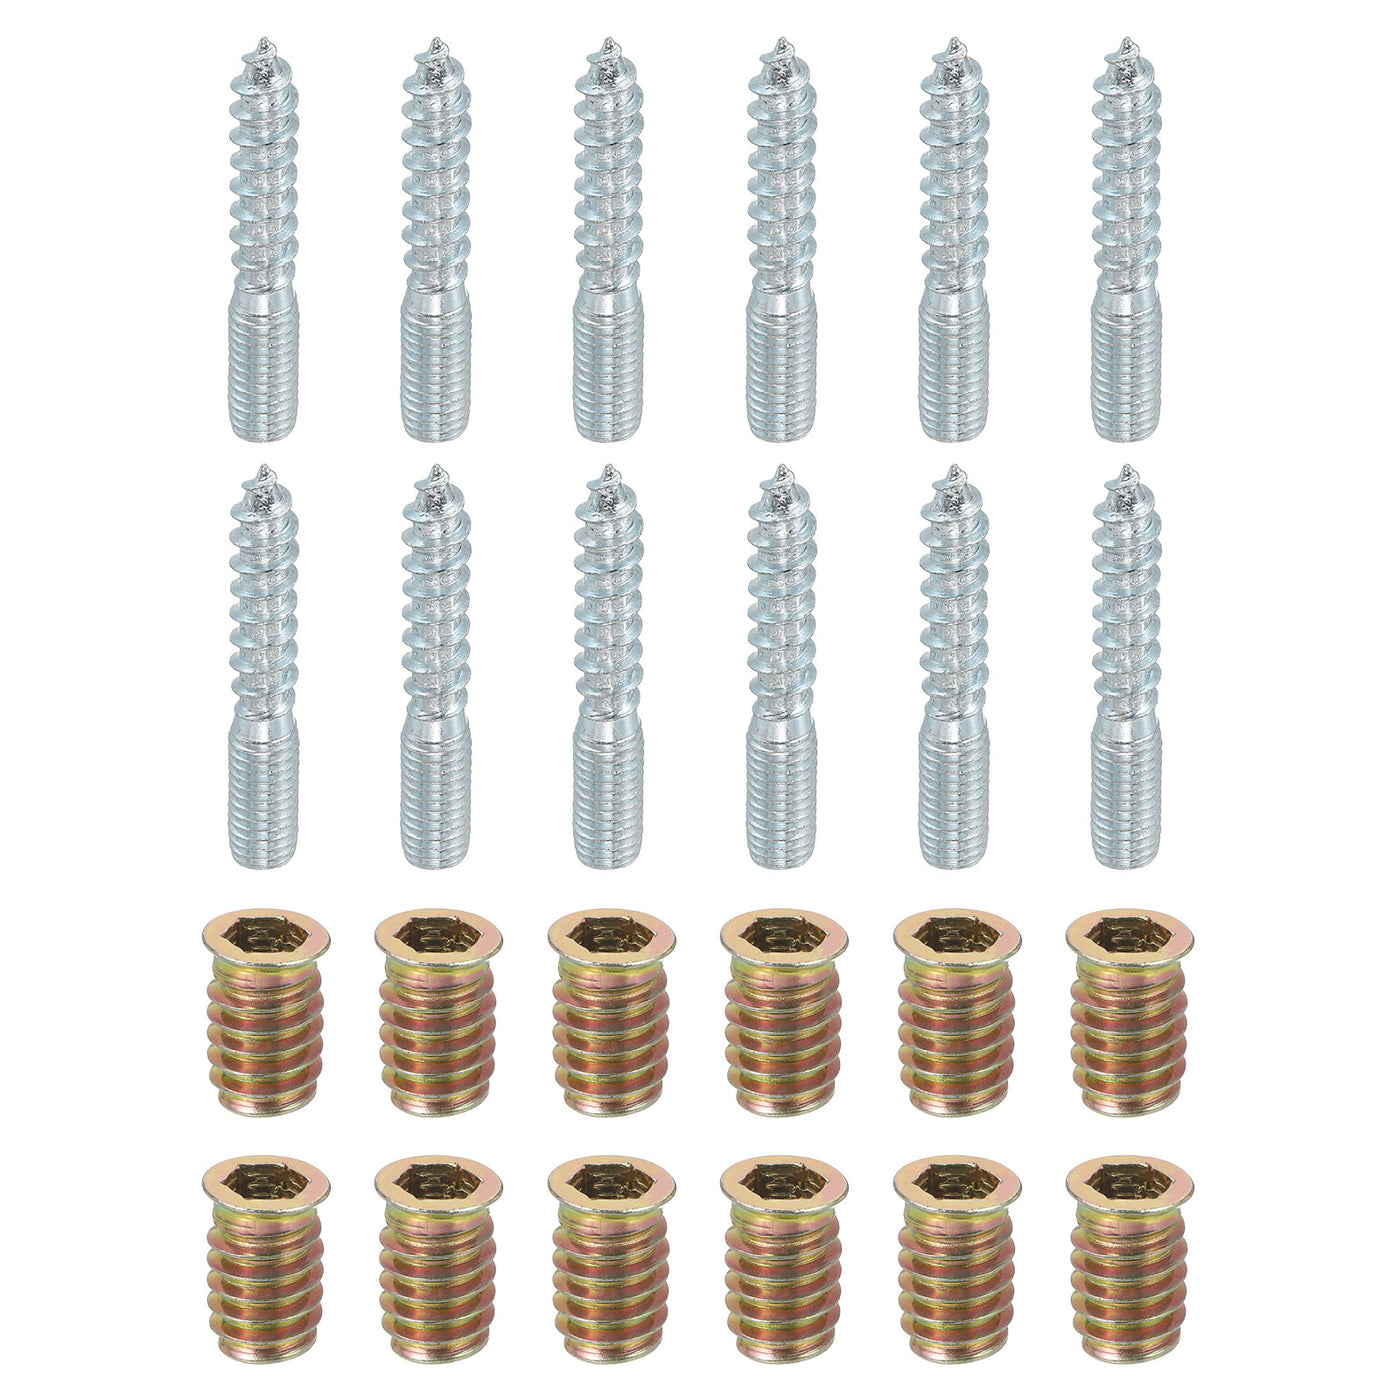 uxcell Uxcell 12pcs M8x50mm Hanger Bolts with 12pcs M8x20mm Threaded Insert Nuts Interface